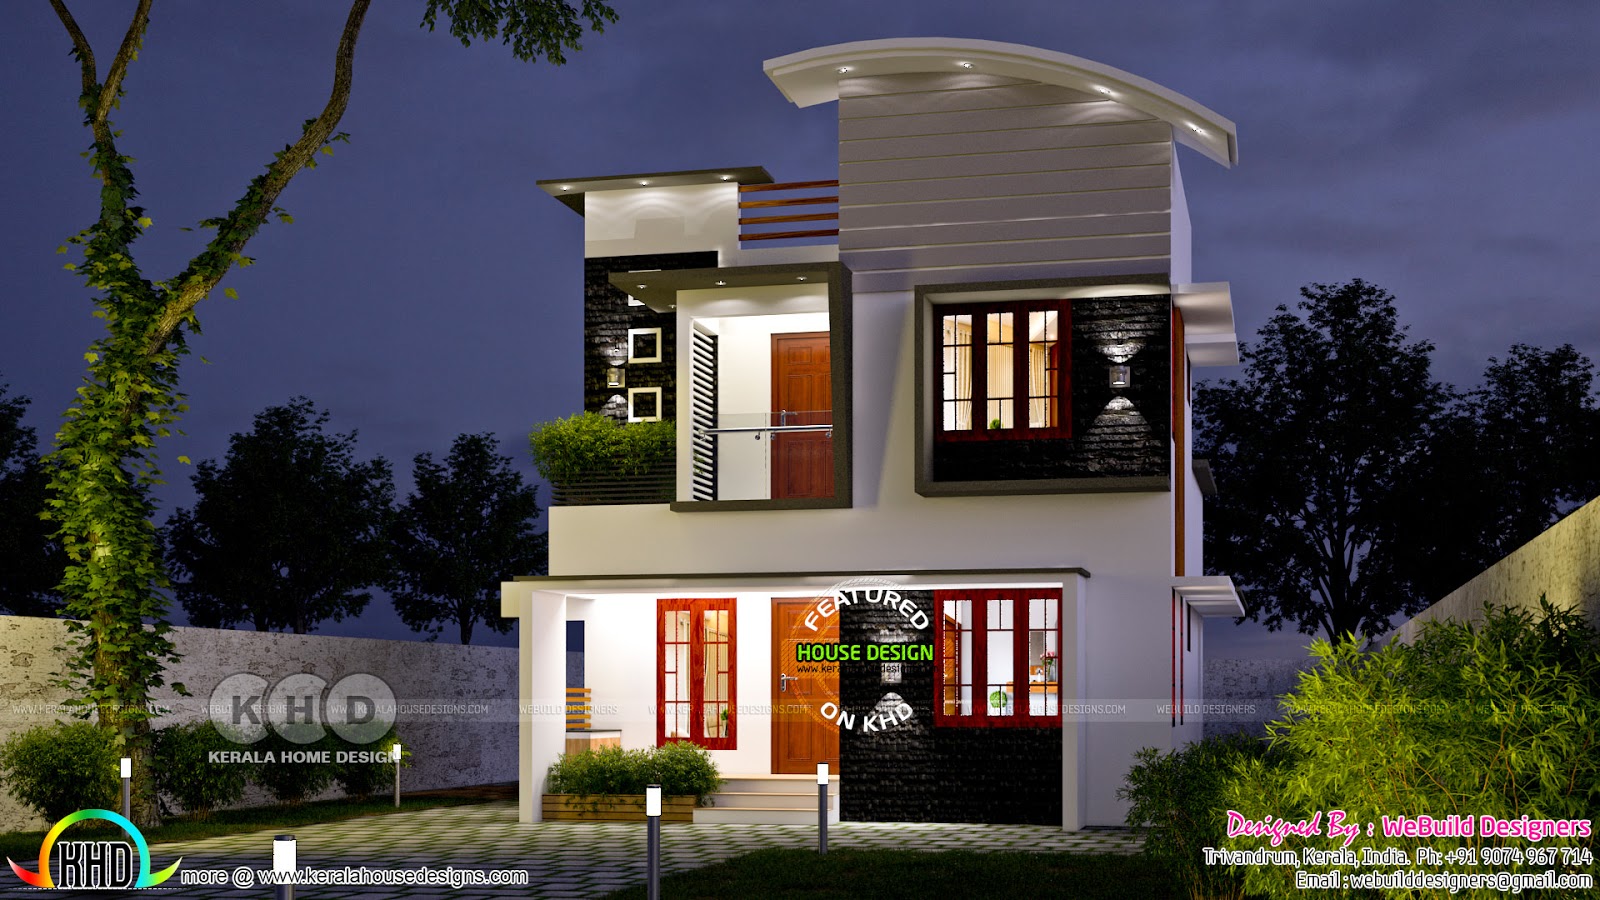 3 BHK small double storied house  1200  sq  ft  Kerala home  